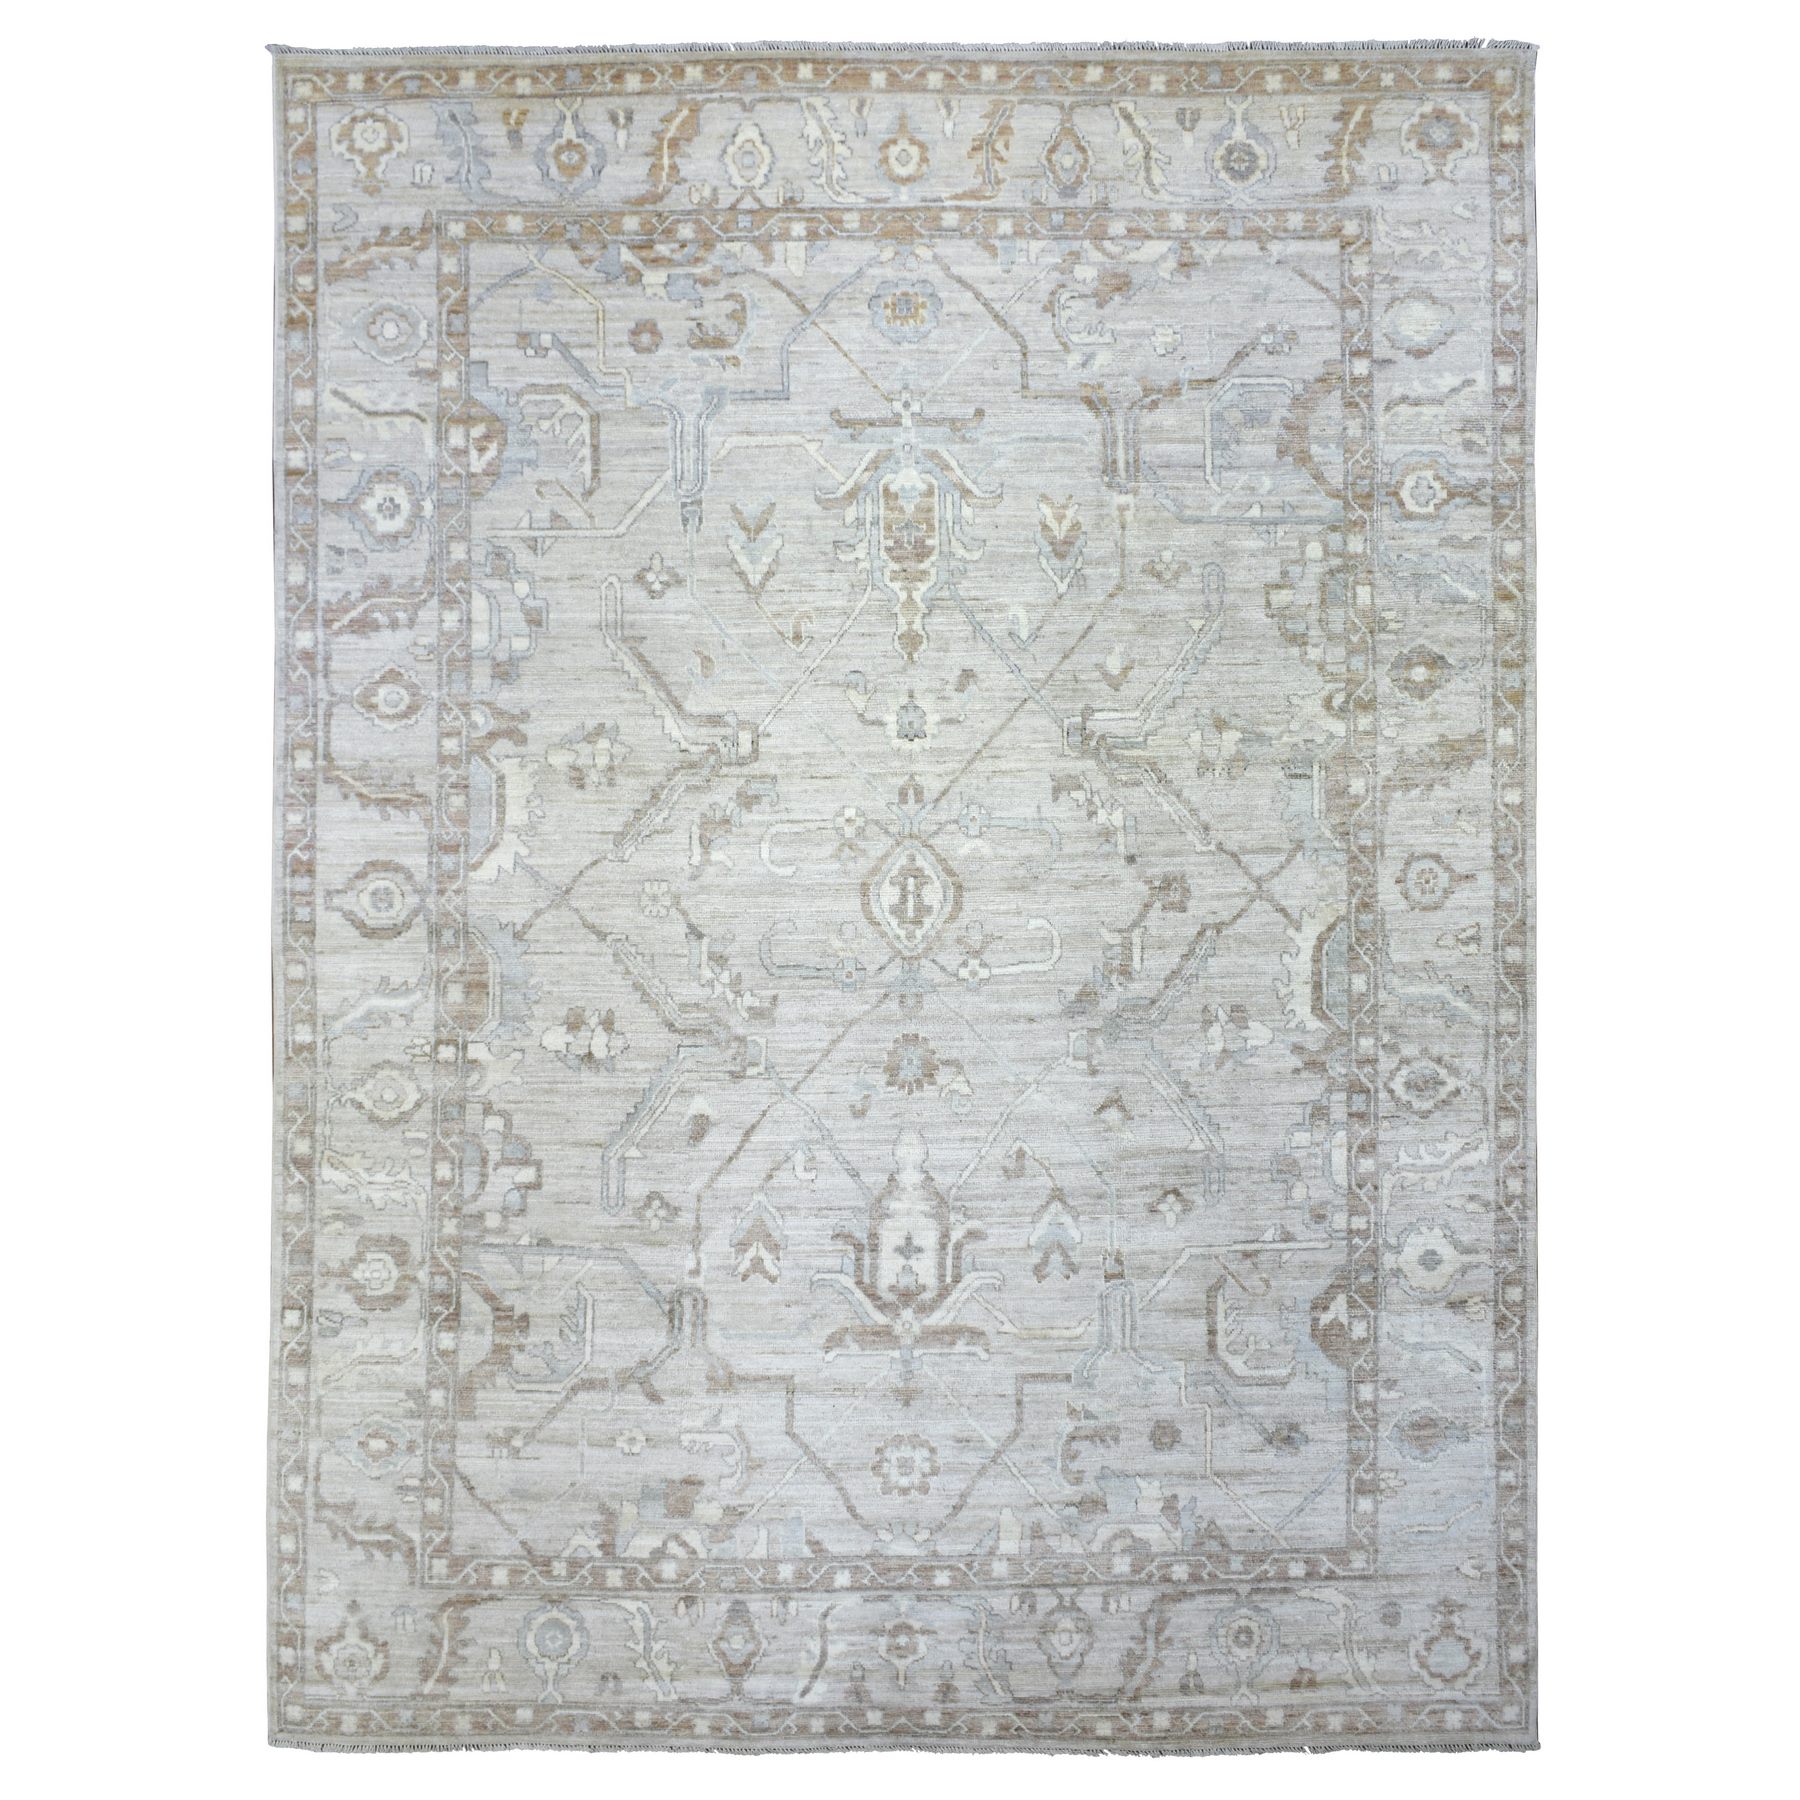 8'9"x12' Gray Hand Woven Angora Ushak Natural Dyes, Flowing And Open Design, Afghan Wool Oriental Rug 